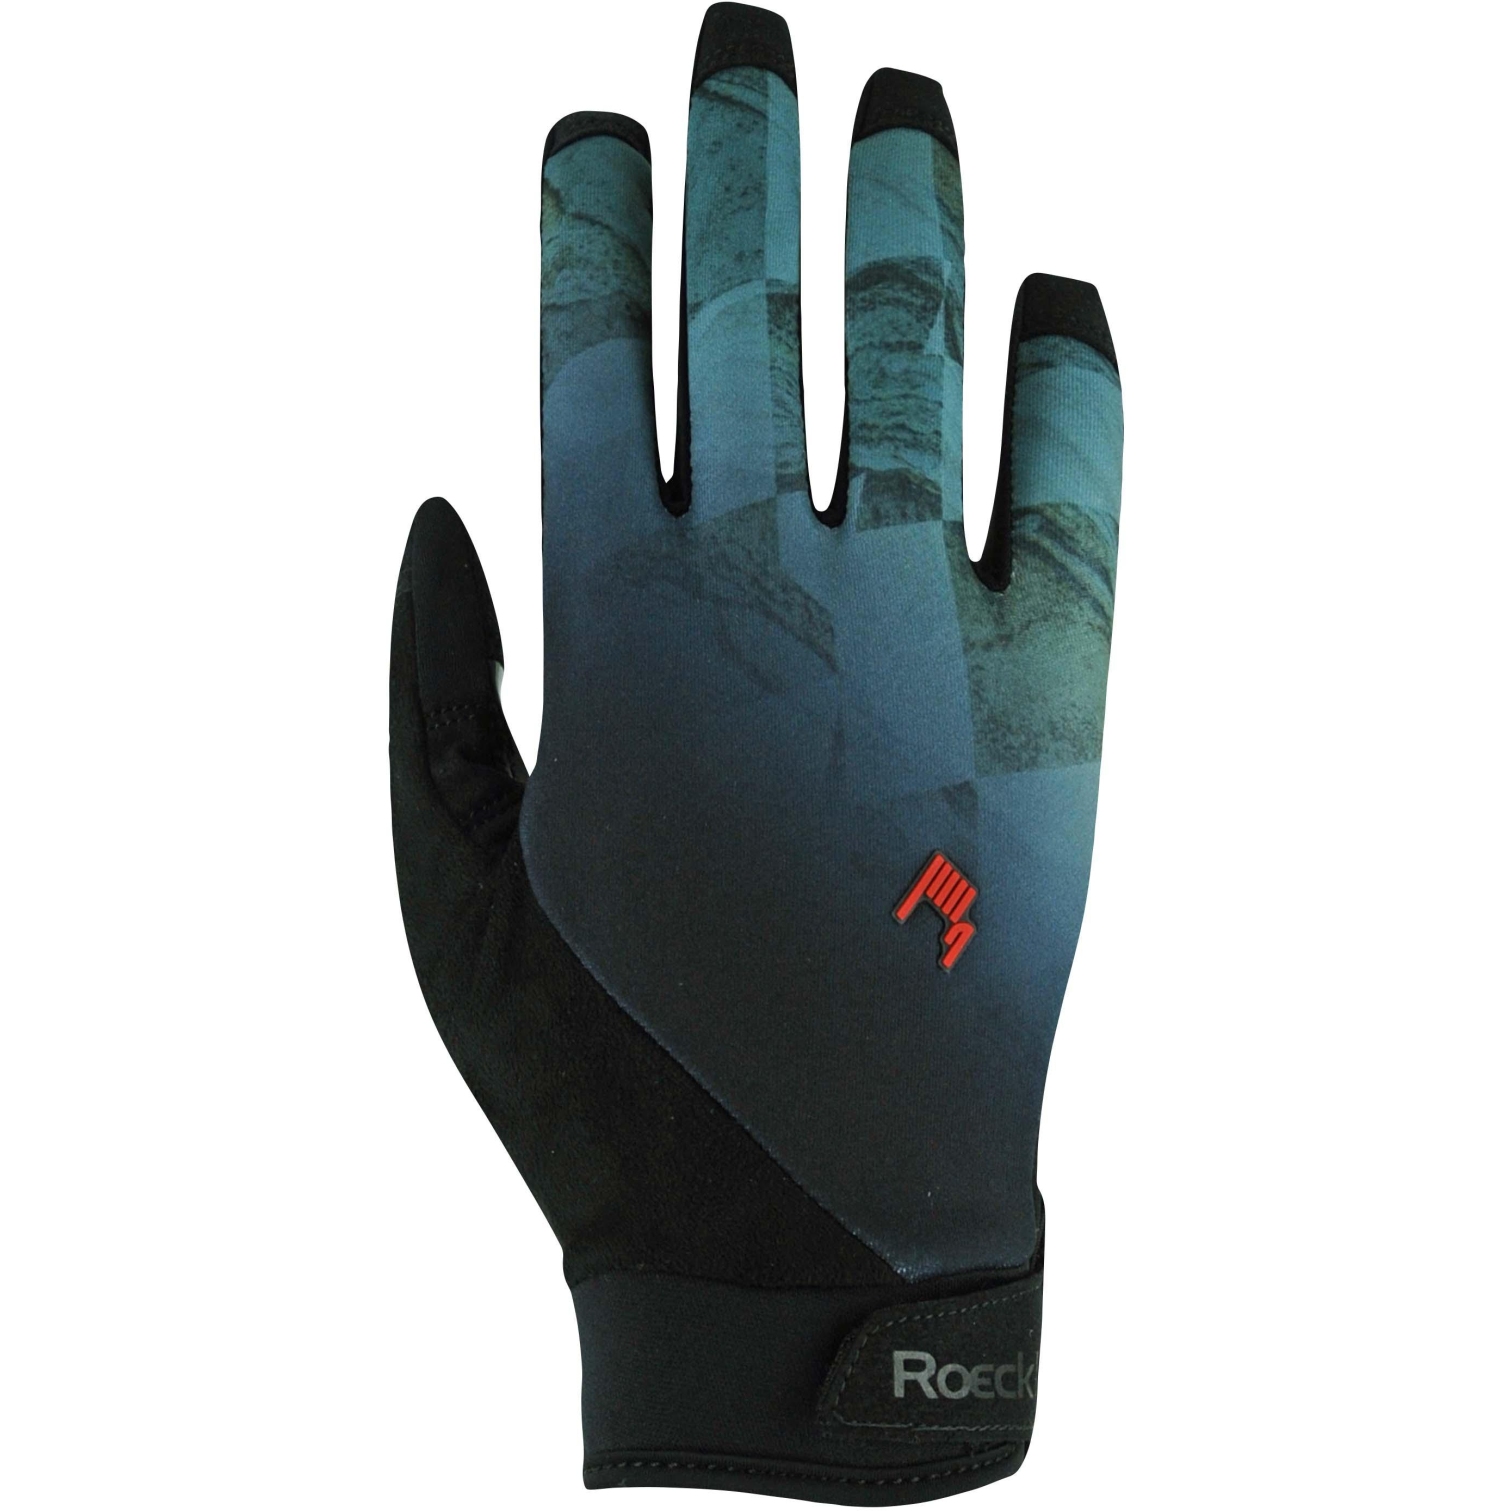 Image of Roeckl Sports Montan Cycling Gloves Kids - arctic 5310